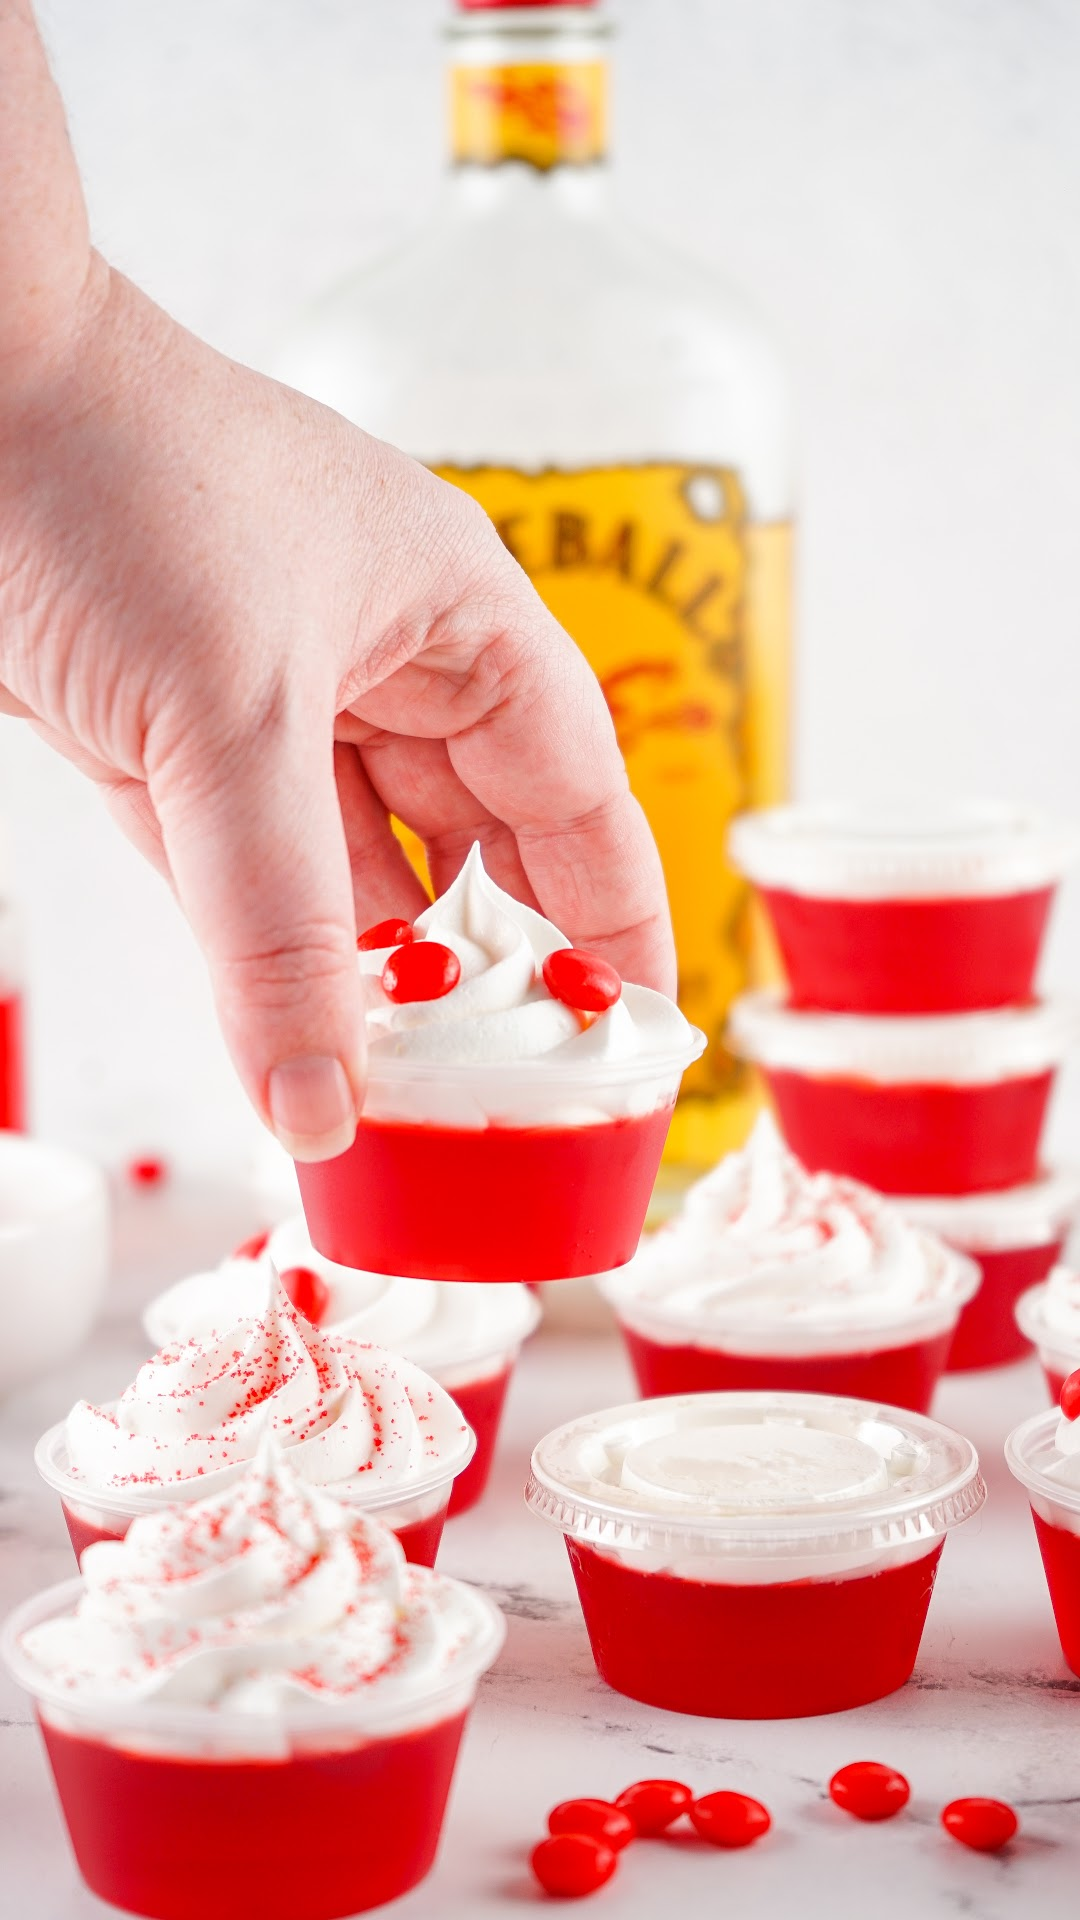 Cherry fireball jello shots with a bottle of Fireball in the background. Topped with whipped cream and red hot candy.